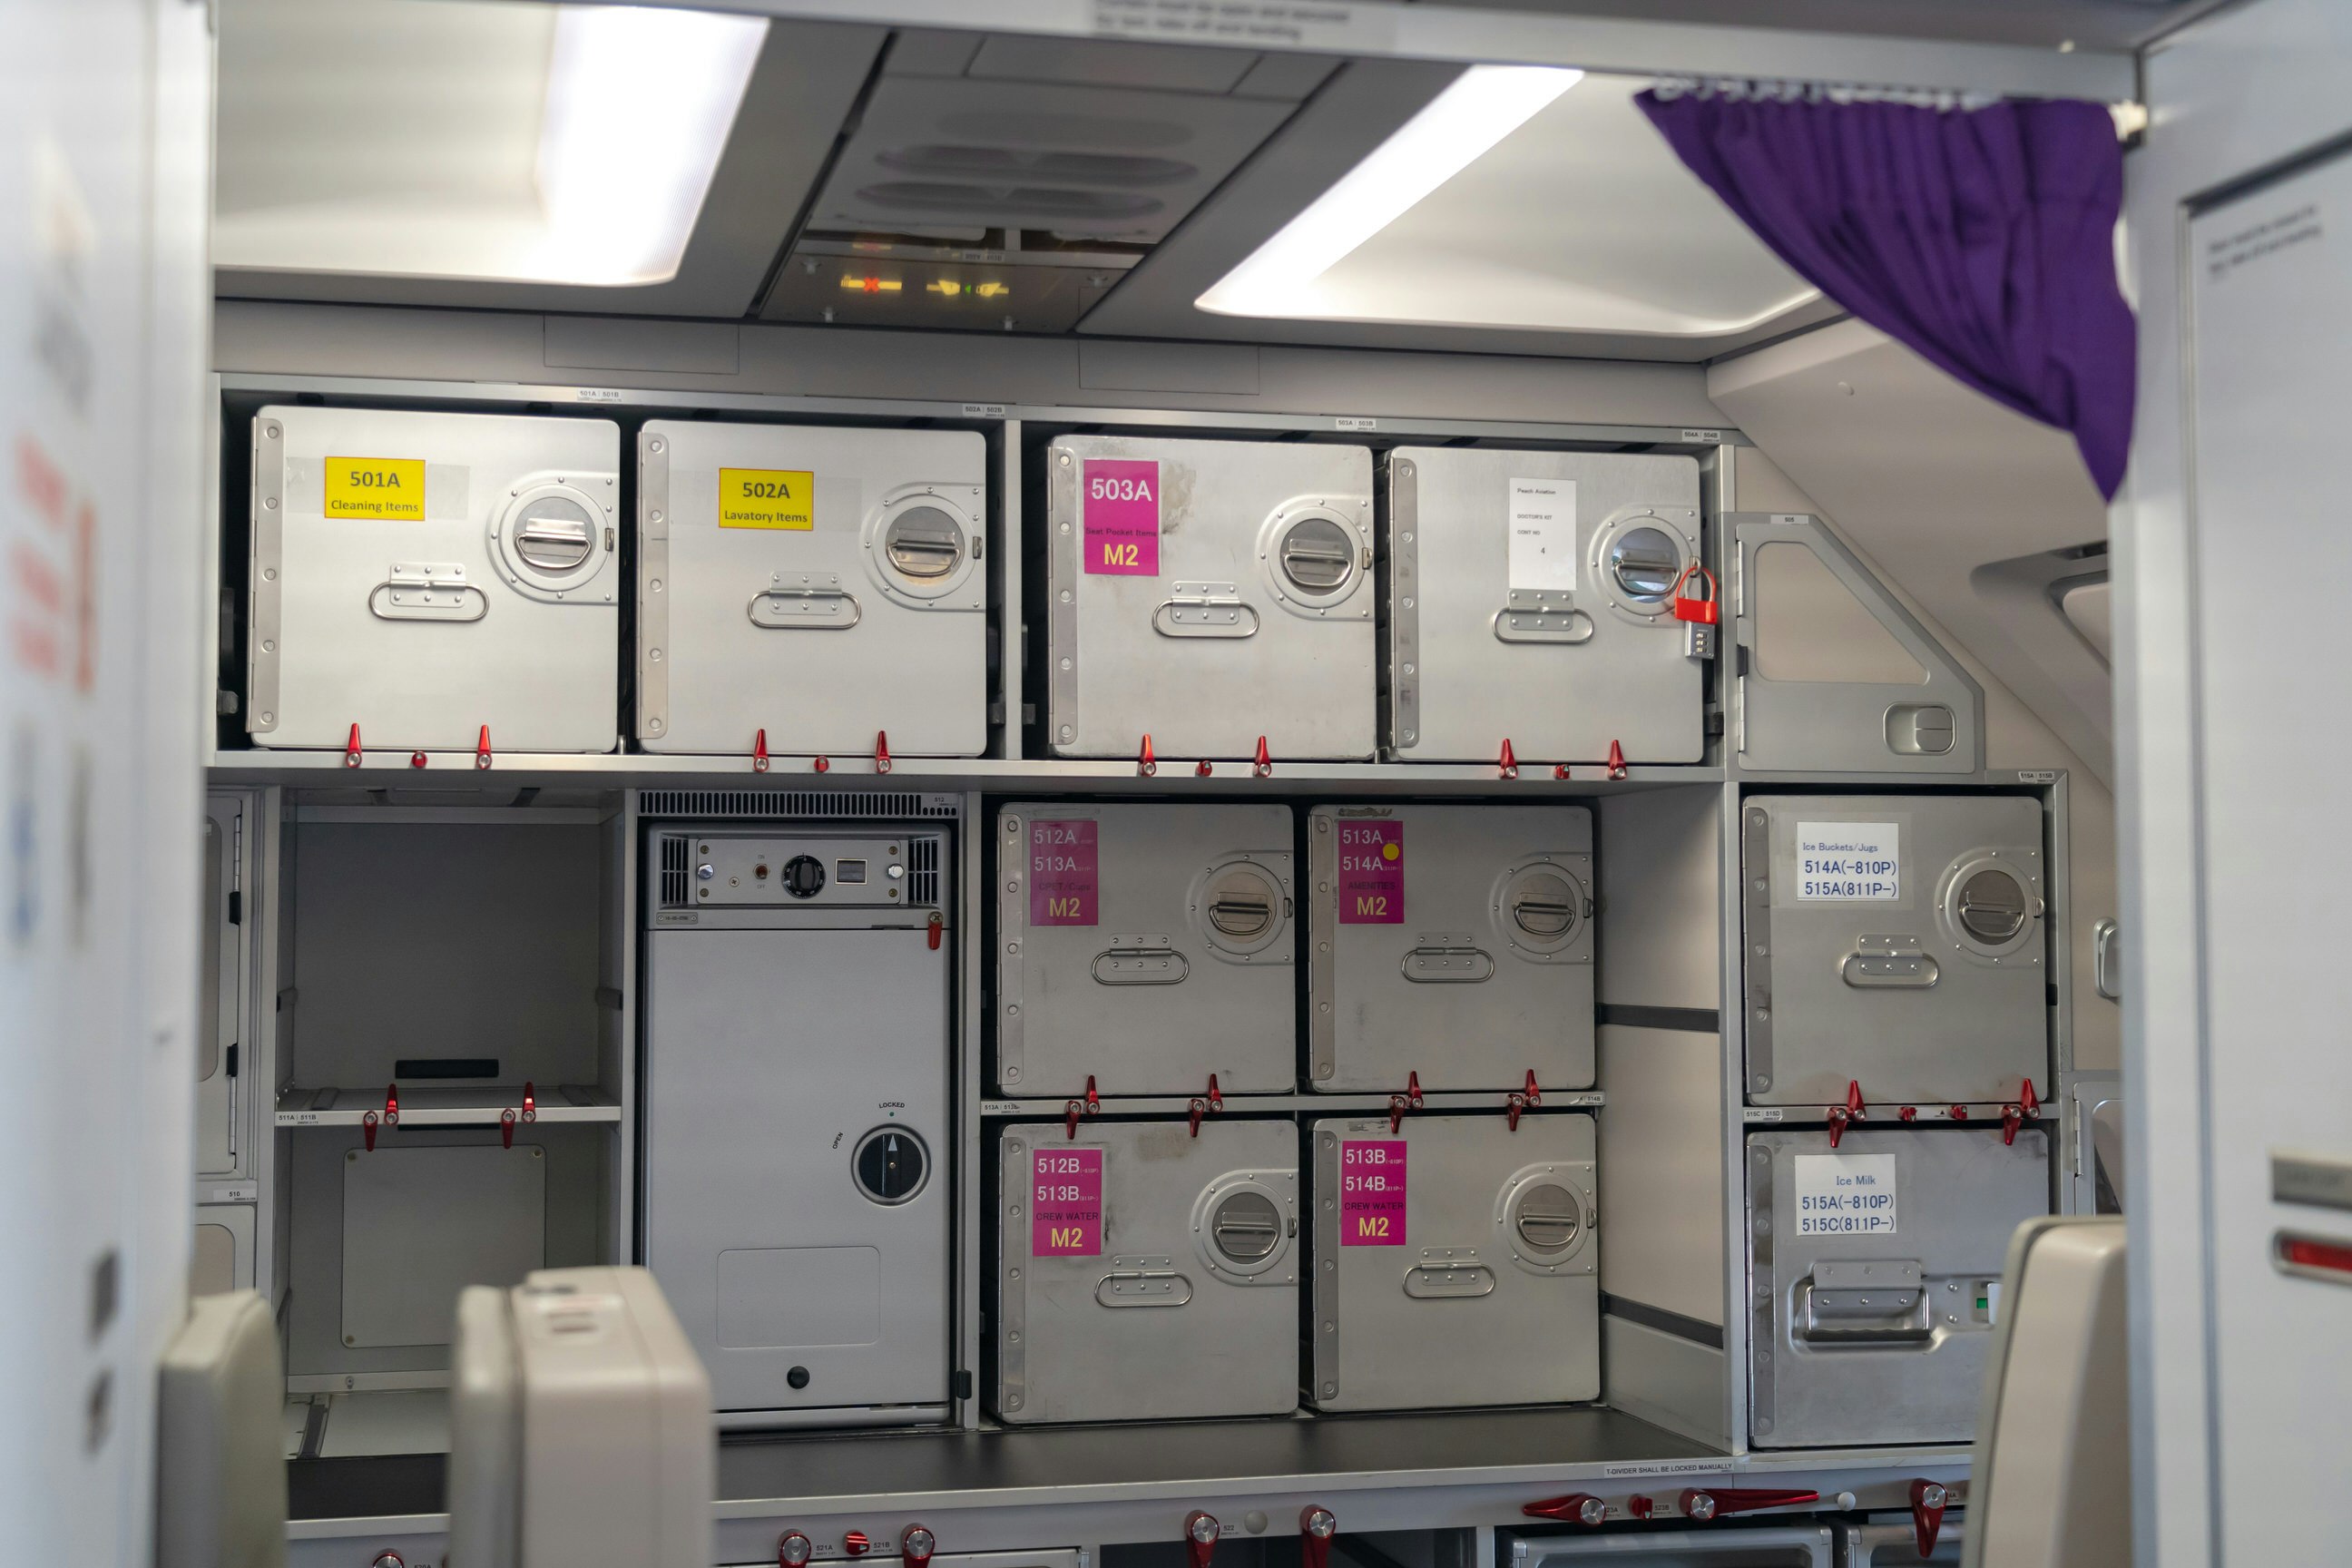 Stainless steel boxes and trolleys are neatly stowed away in special compartments in an aircraft's galley kitchen.